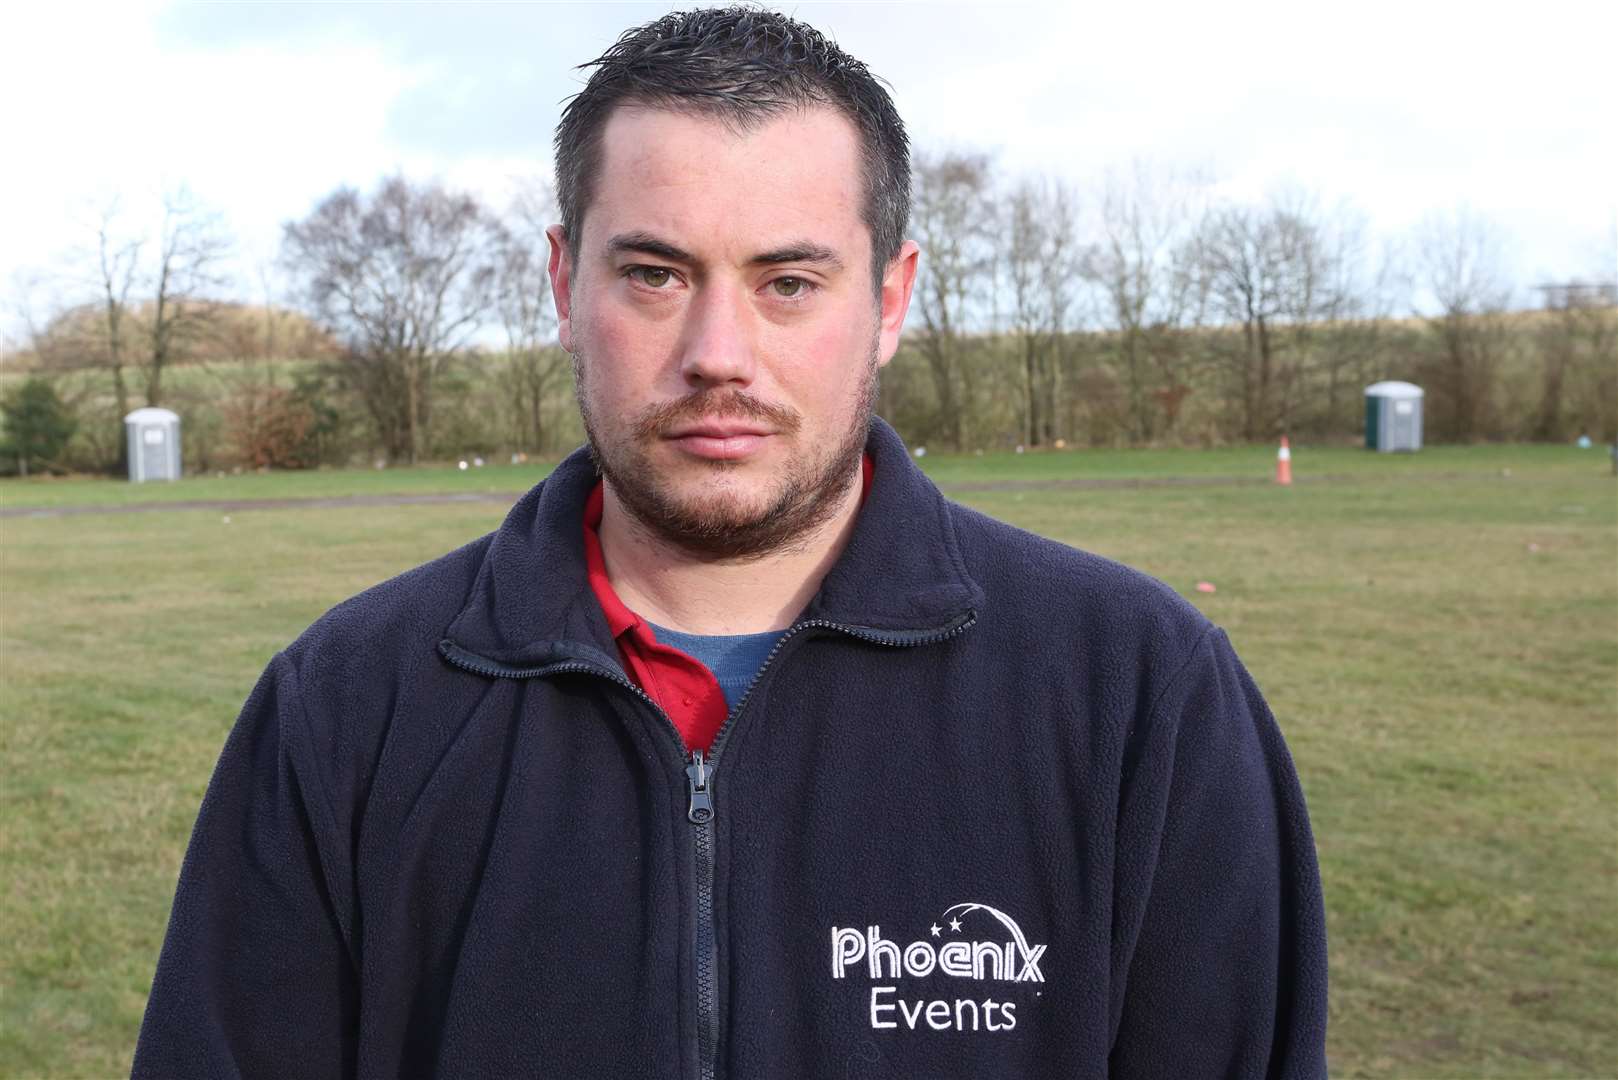 Phoenix Fireworks operations director Will Defries. Picture: UKNIP